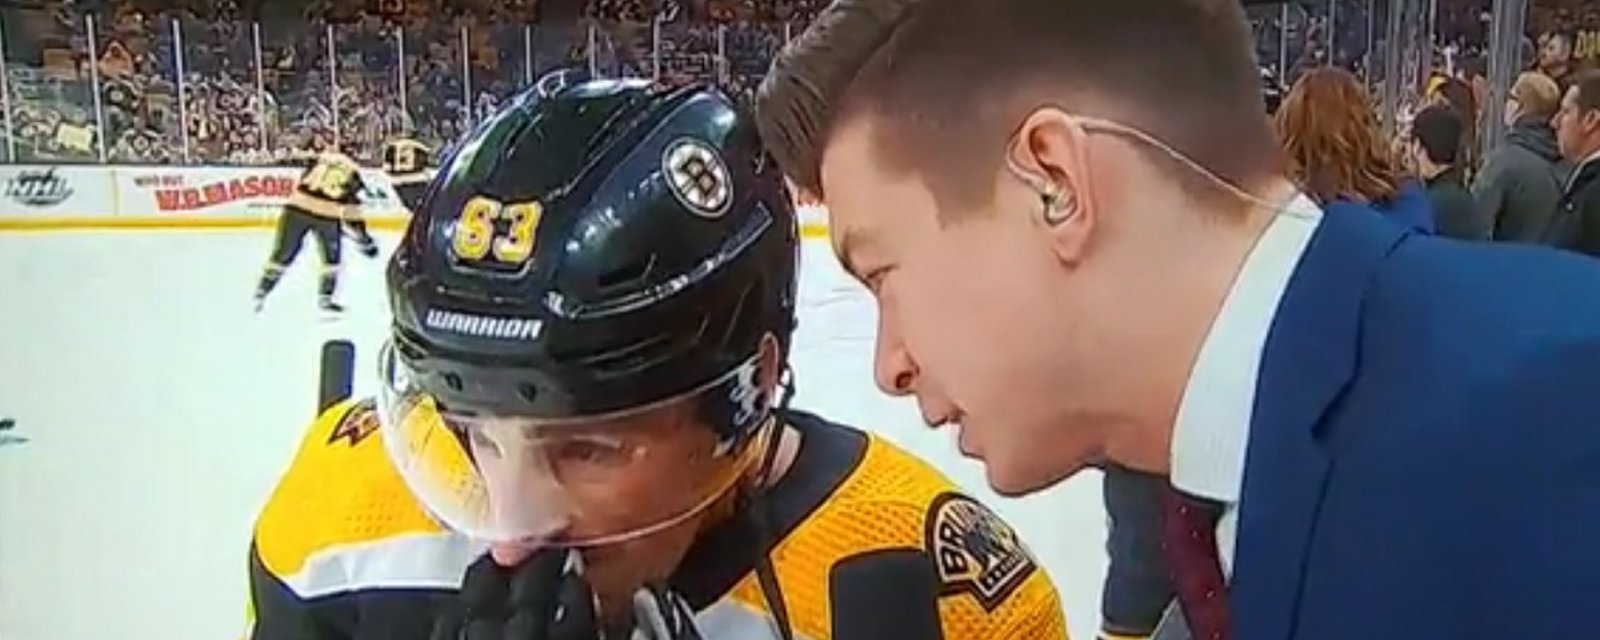 Brad Marchand not happy with question during pregame interview.